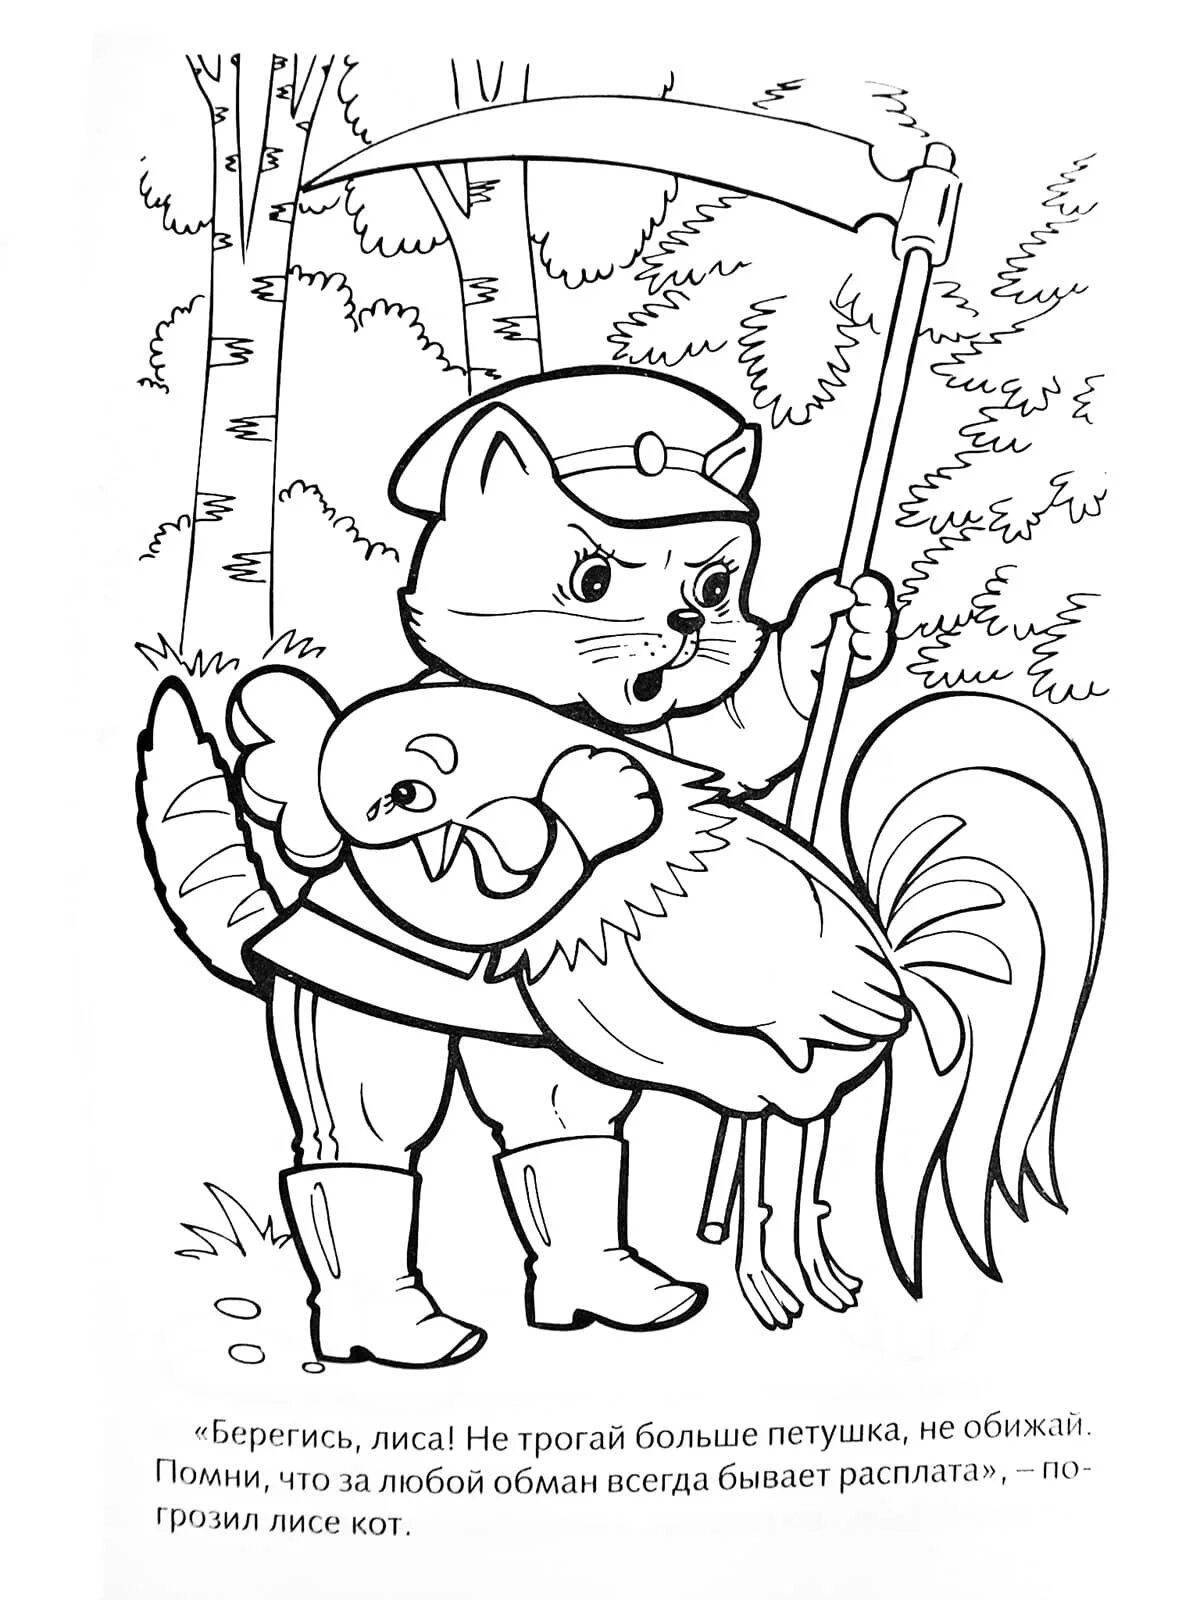 Radiant coloring page fairy tale illustration